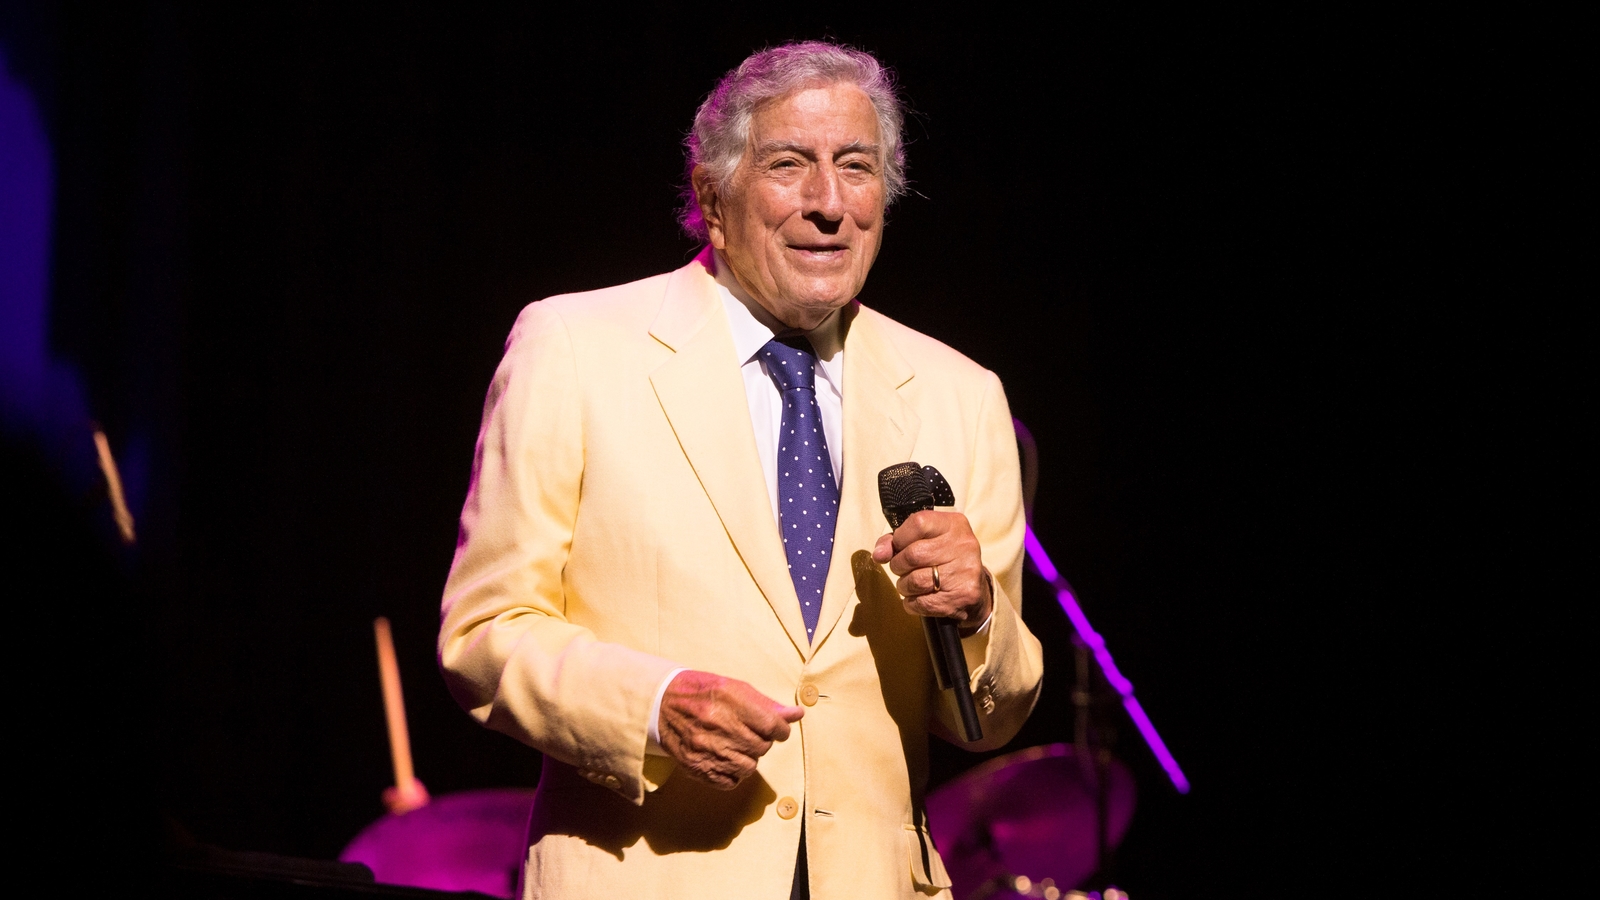 Tony Bennett Death Masterful Singer Known For I Left My Heart In San Francisco Dies At 96 6928